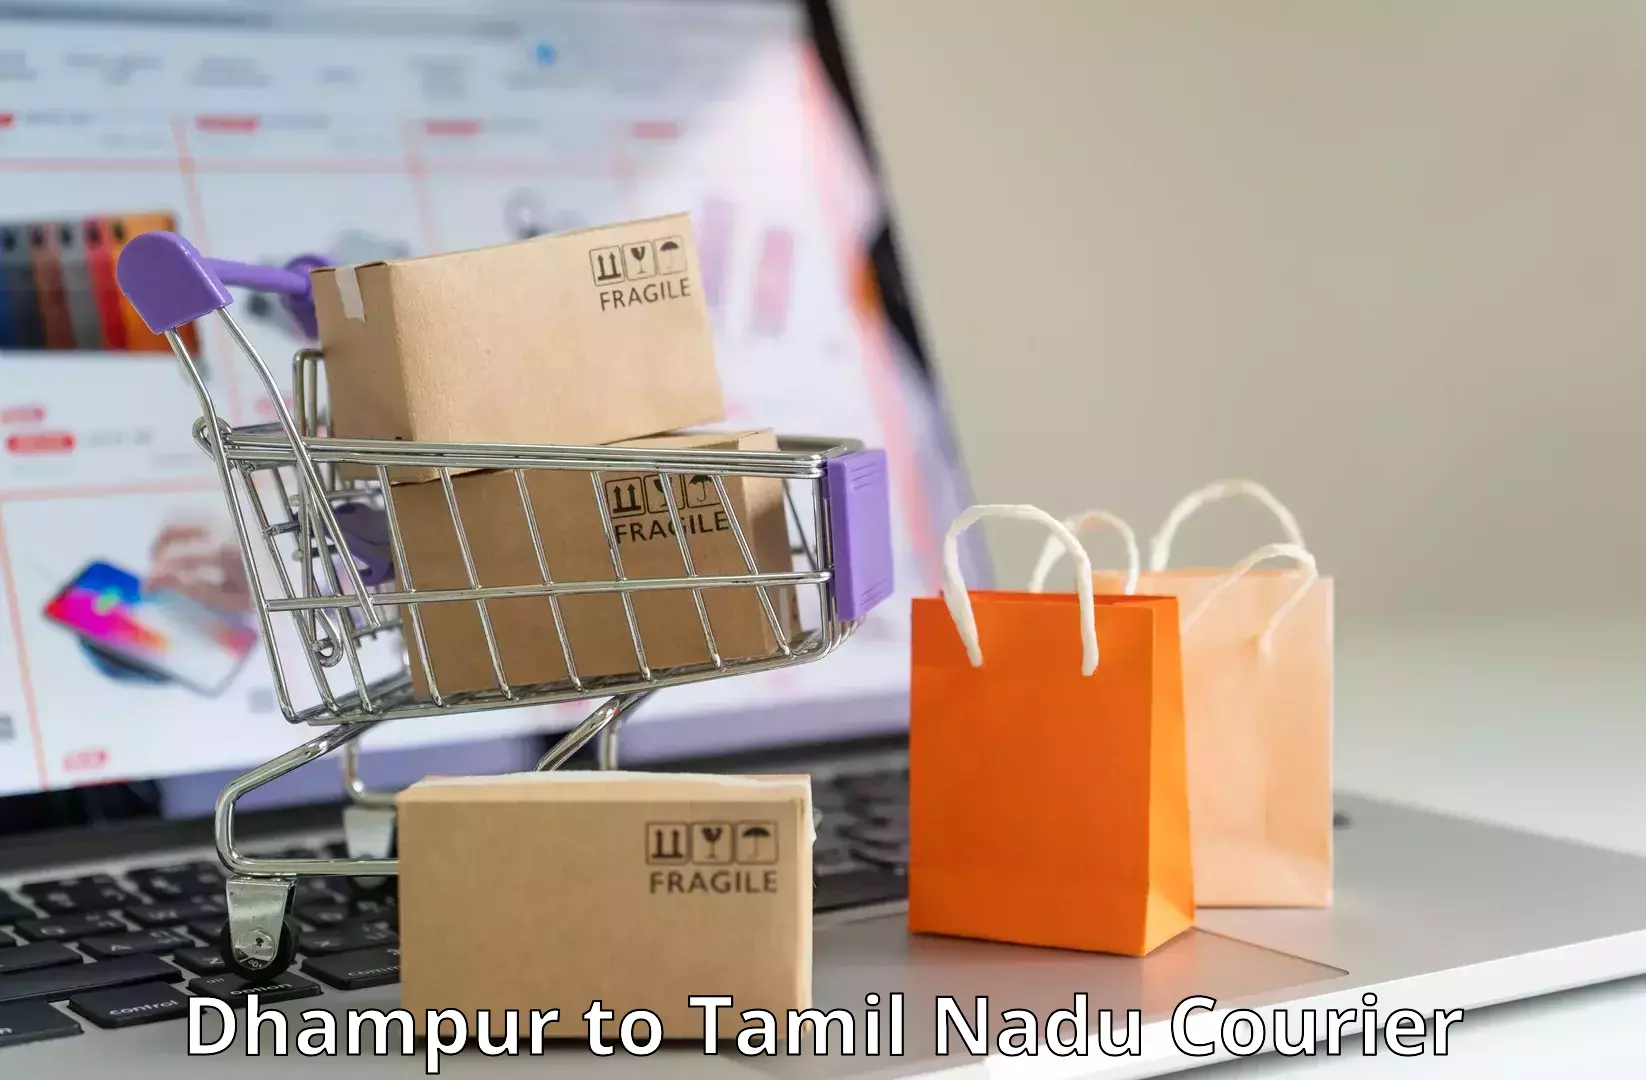 24-hour courier service Dhampur to Tamil Nadu